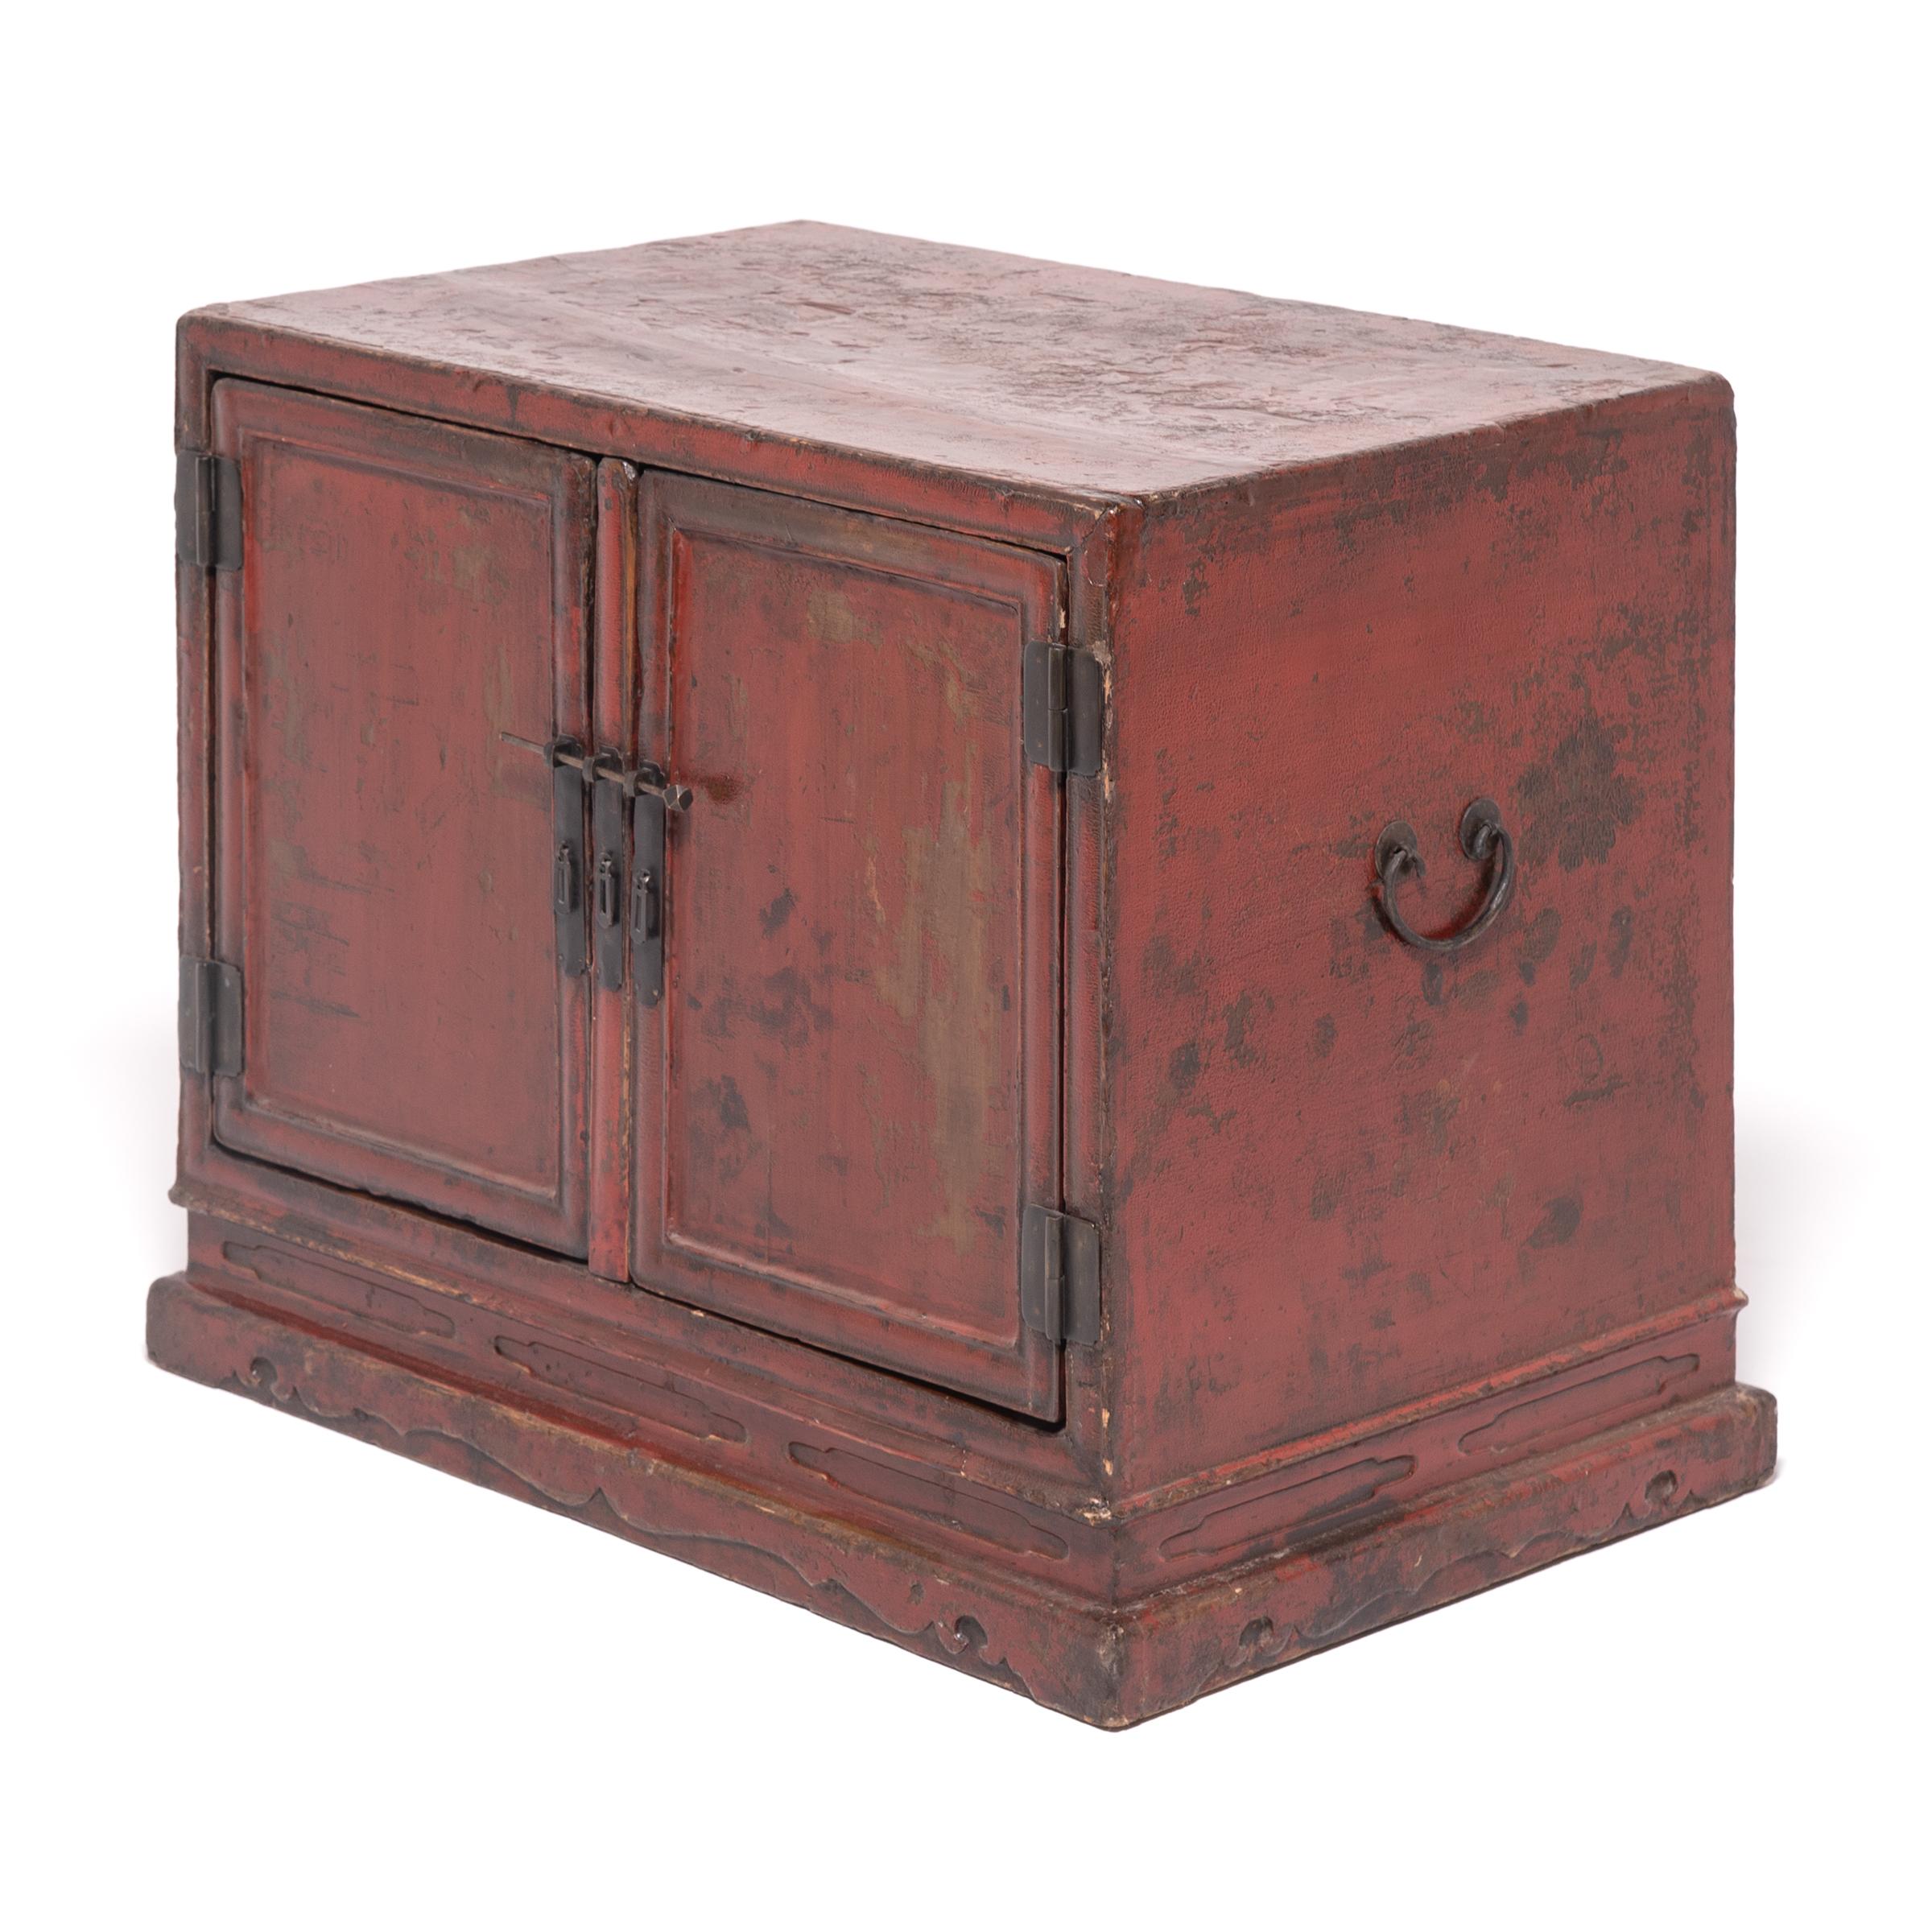 Traces of the original gilt floral painting remain on the doors of this early 18th century red-lacquered chest from Shanxi province. Countless coats of hand-applied red lacquer give the chest its inimitable rich finish. Like many low cabinets from